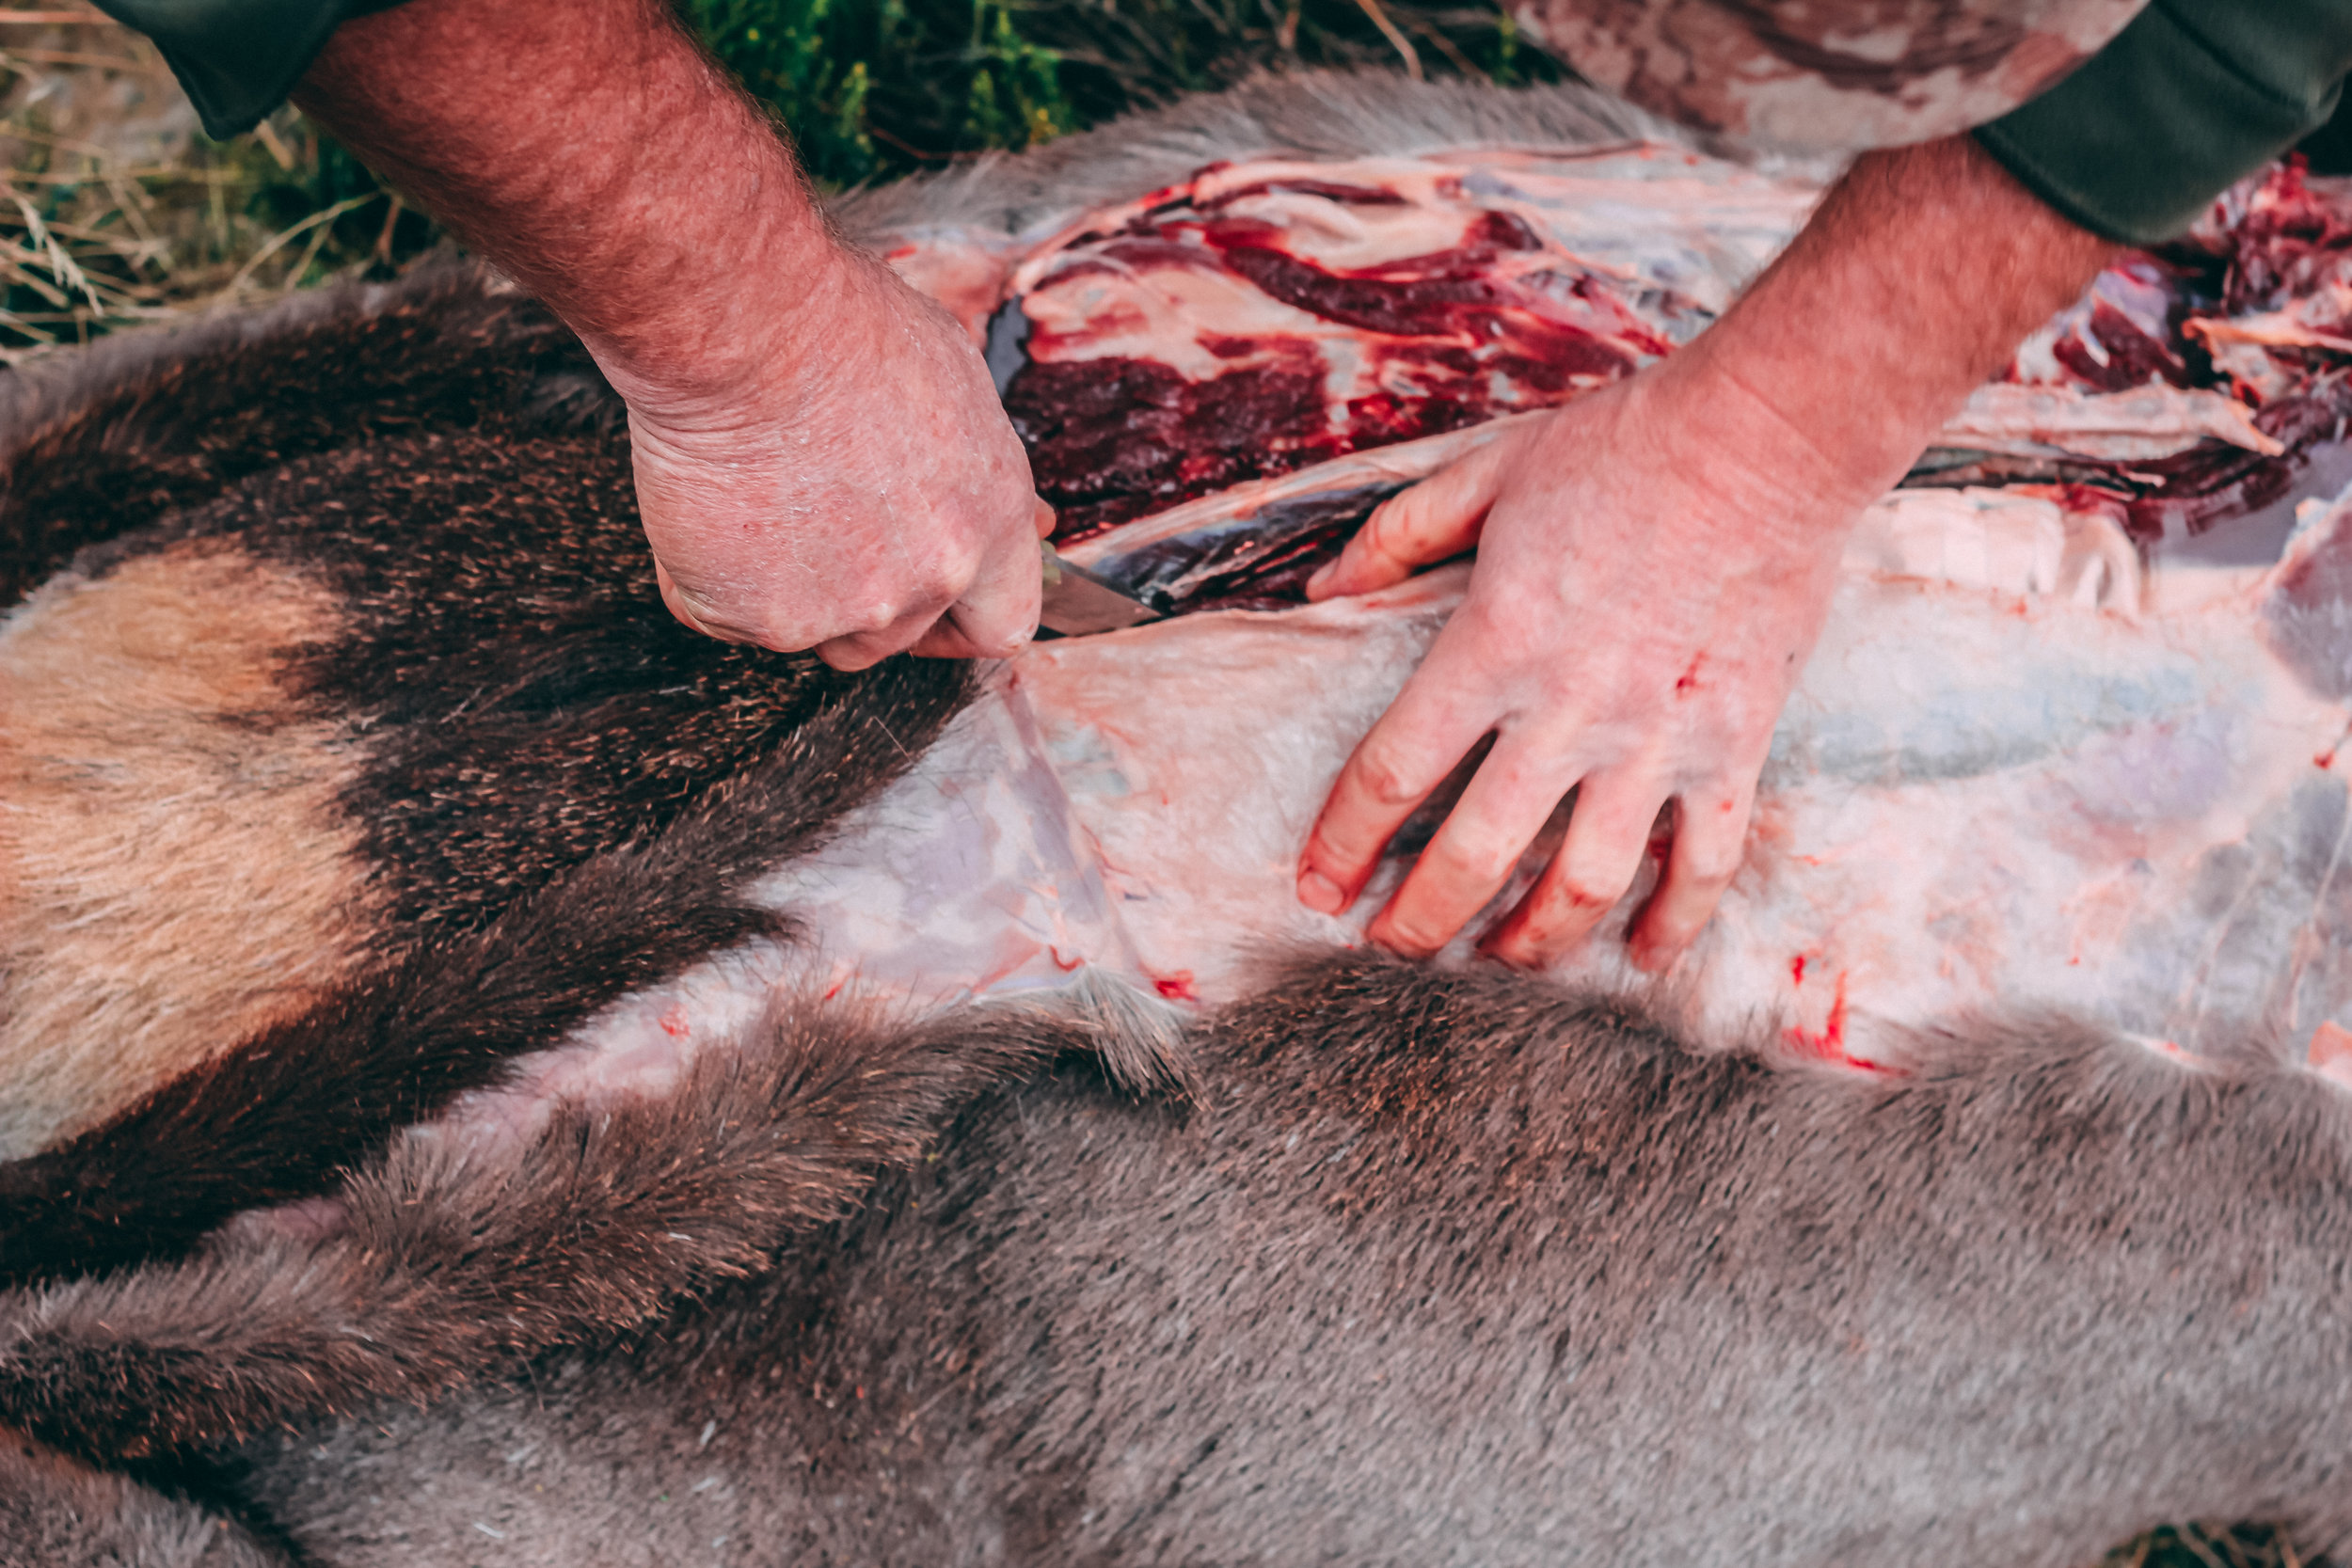  Leave strips of skin from along the back-steaks attached to the rump to make straps for your deer-bum backpack. 